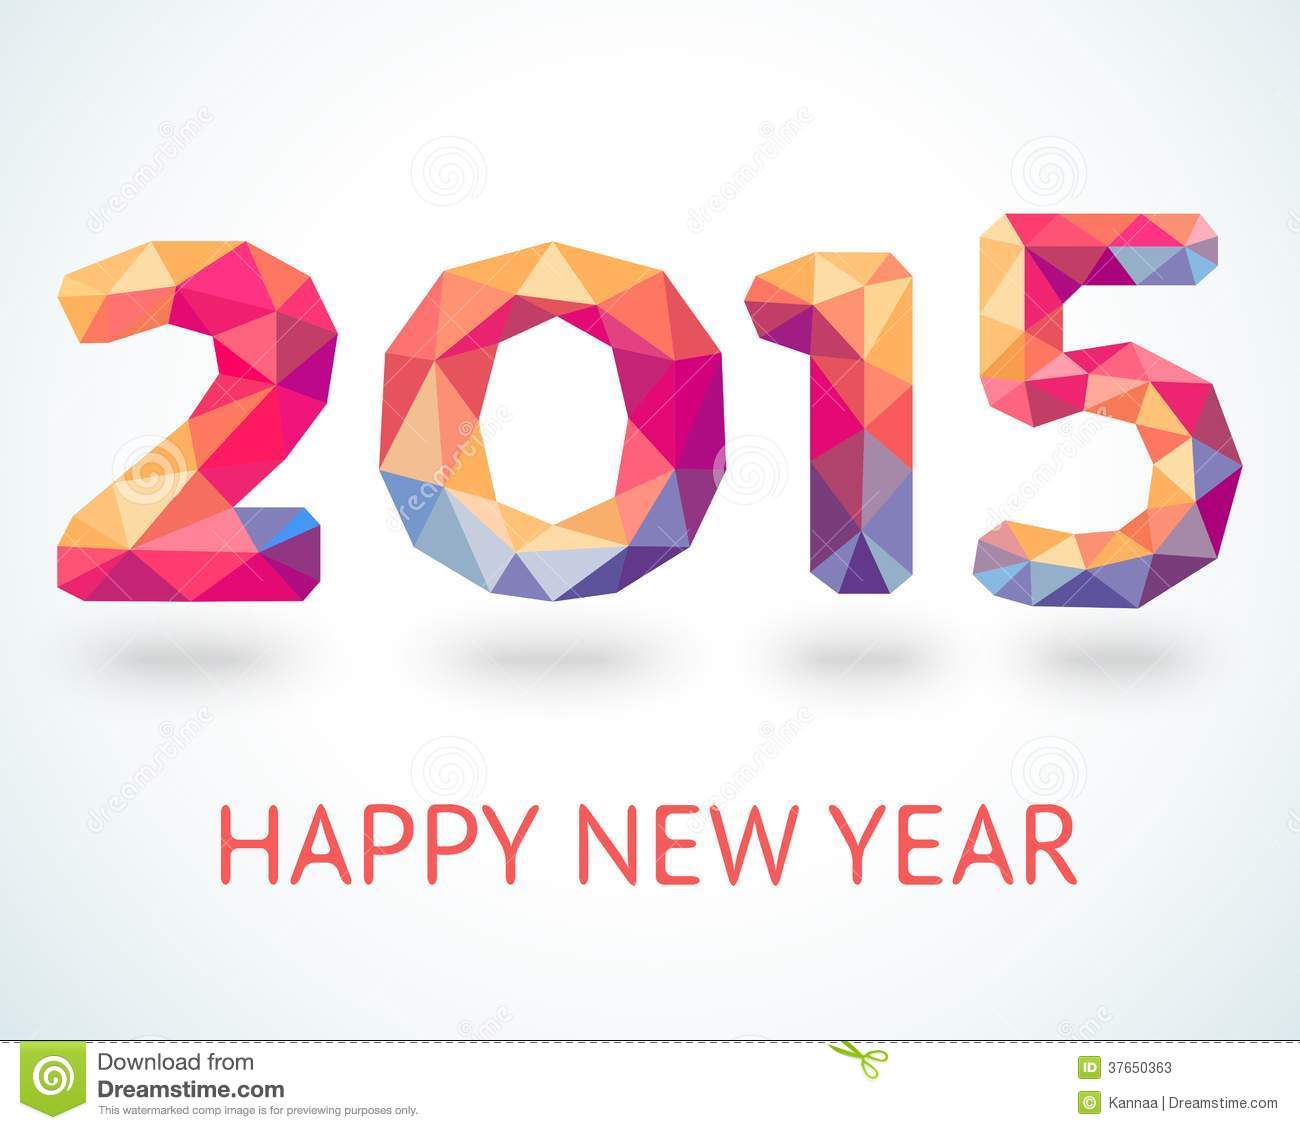 Happy New Year 2015 Colorful Greeting Card Made In Polygonal Origami